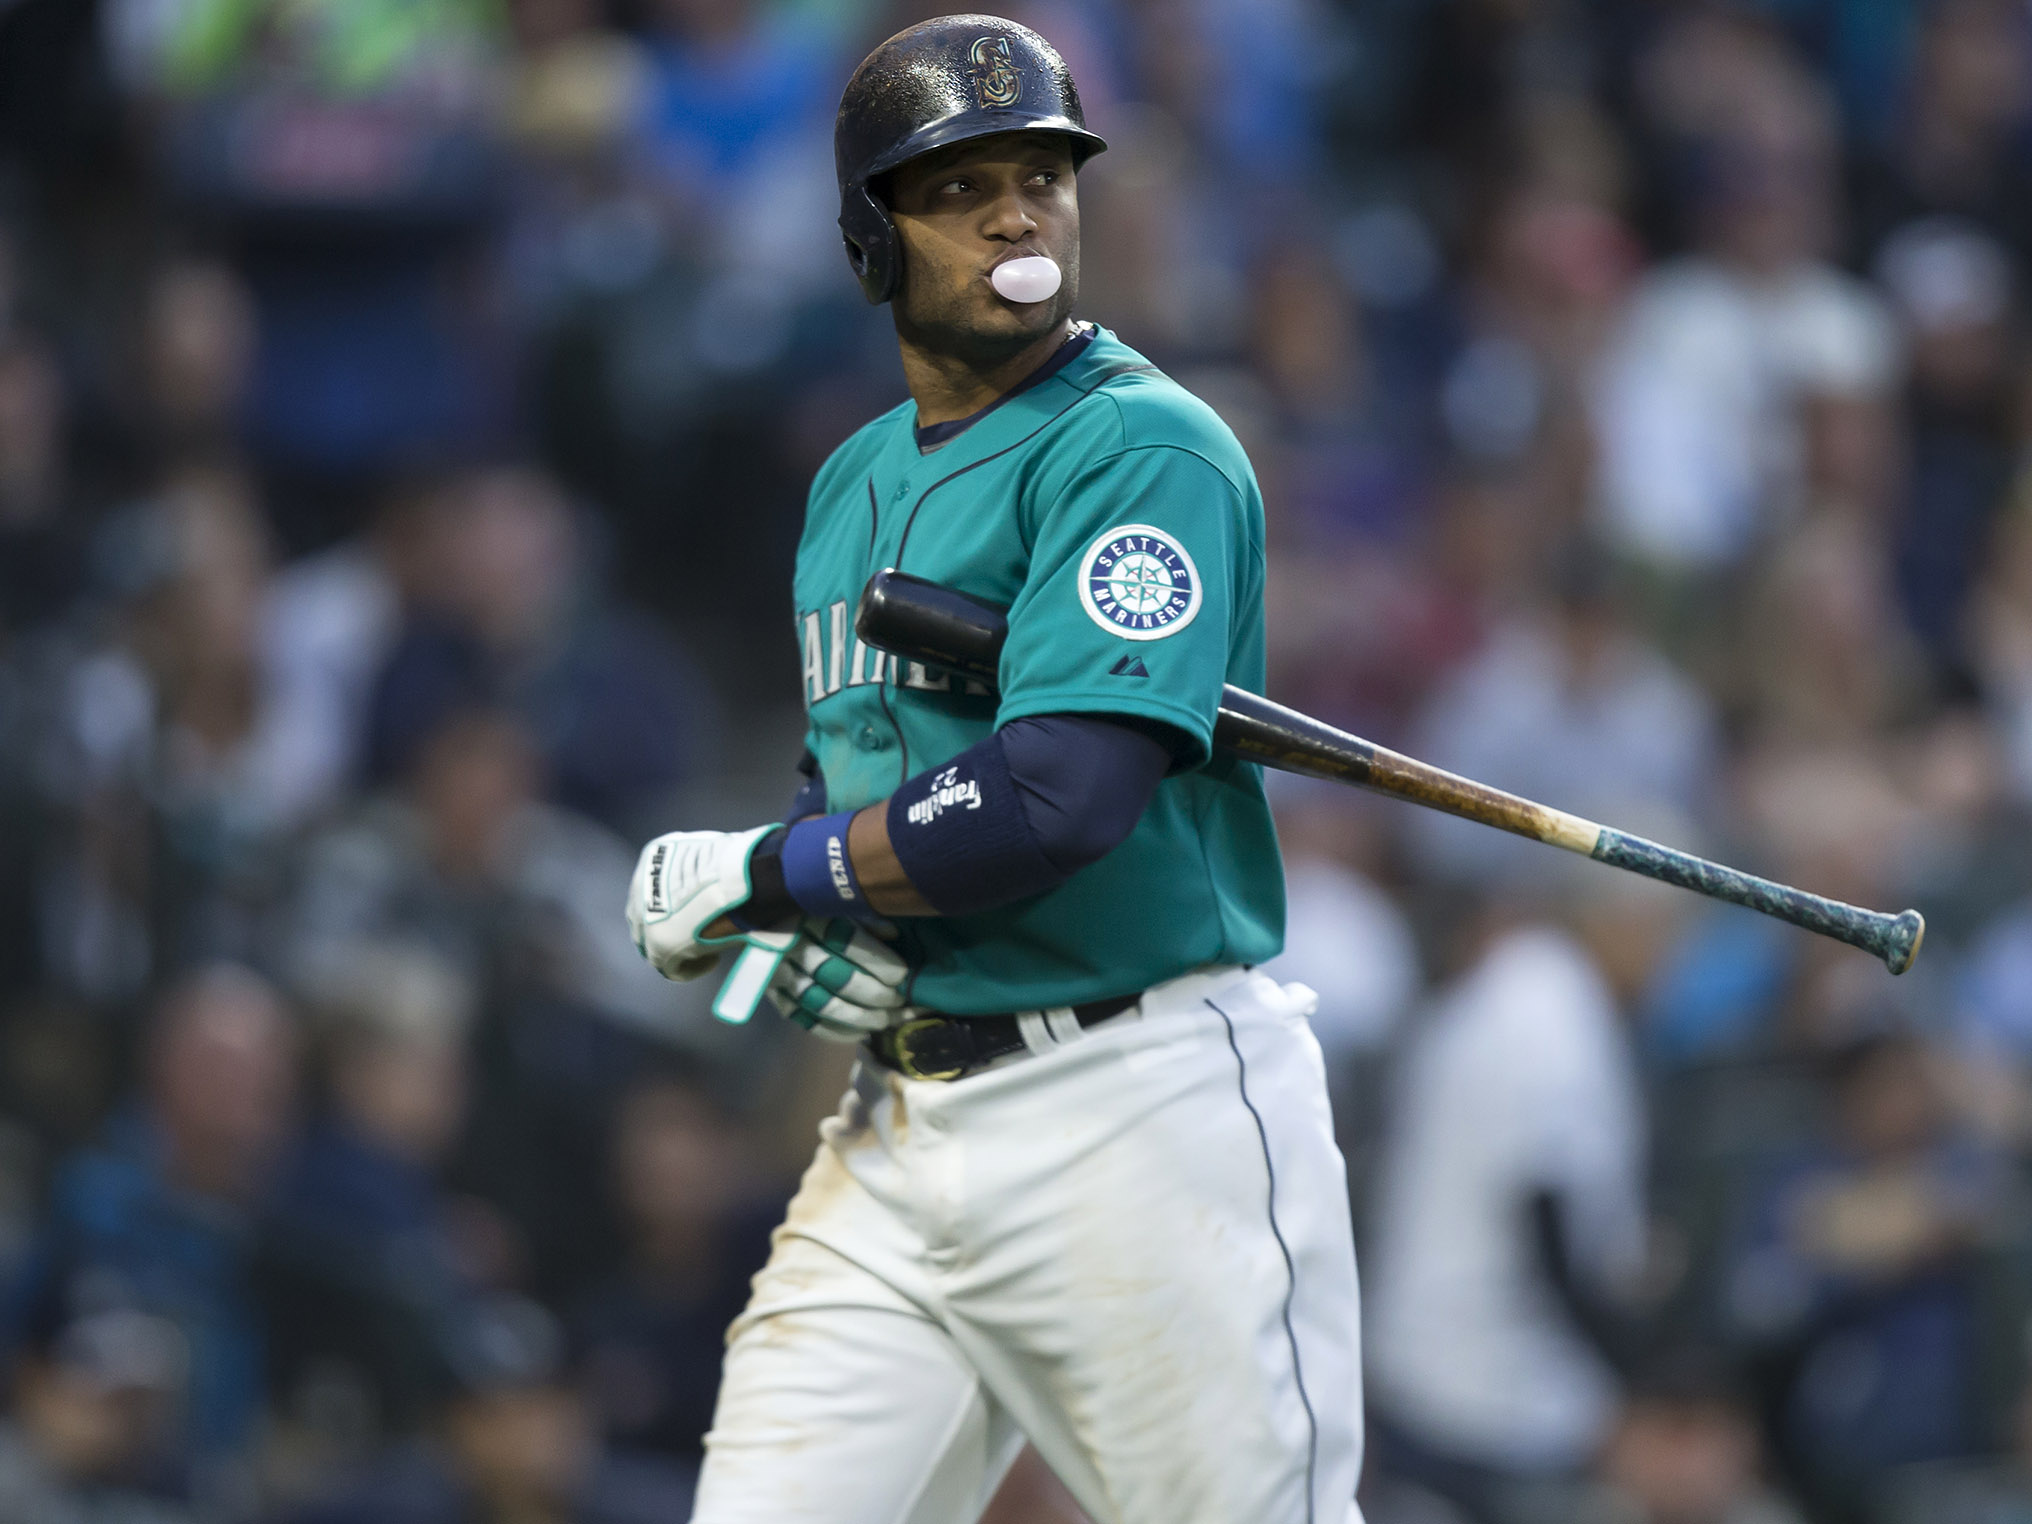 Baseball star Robinson Cano banned for 80 games for failed drugs test, The  Independent